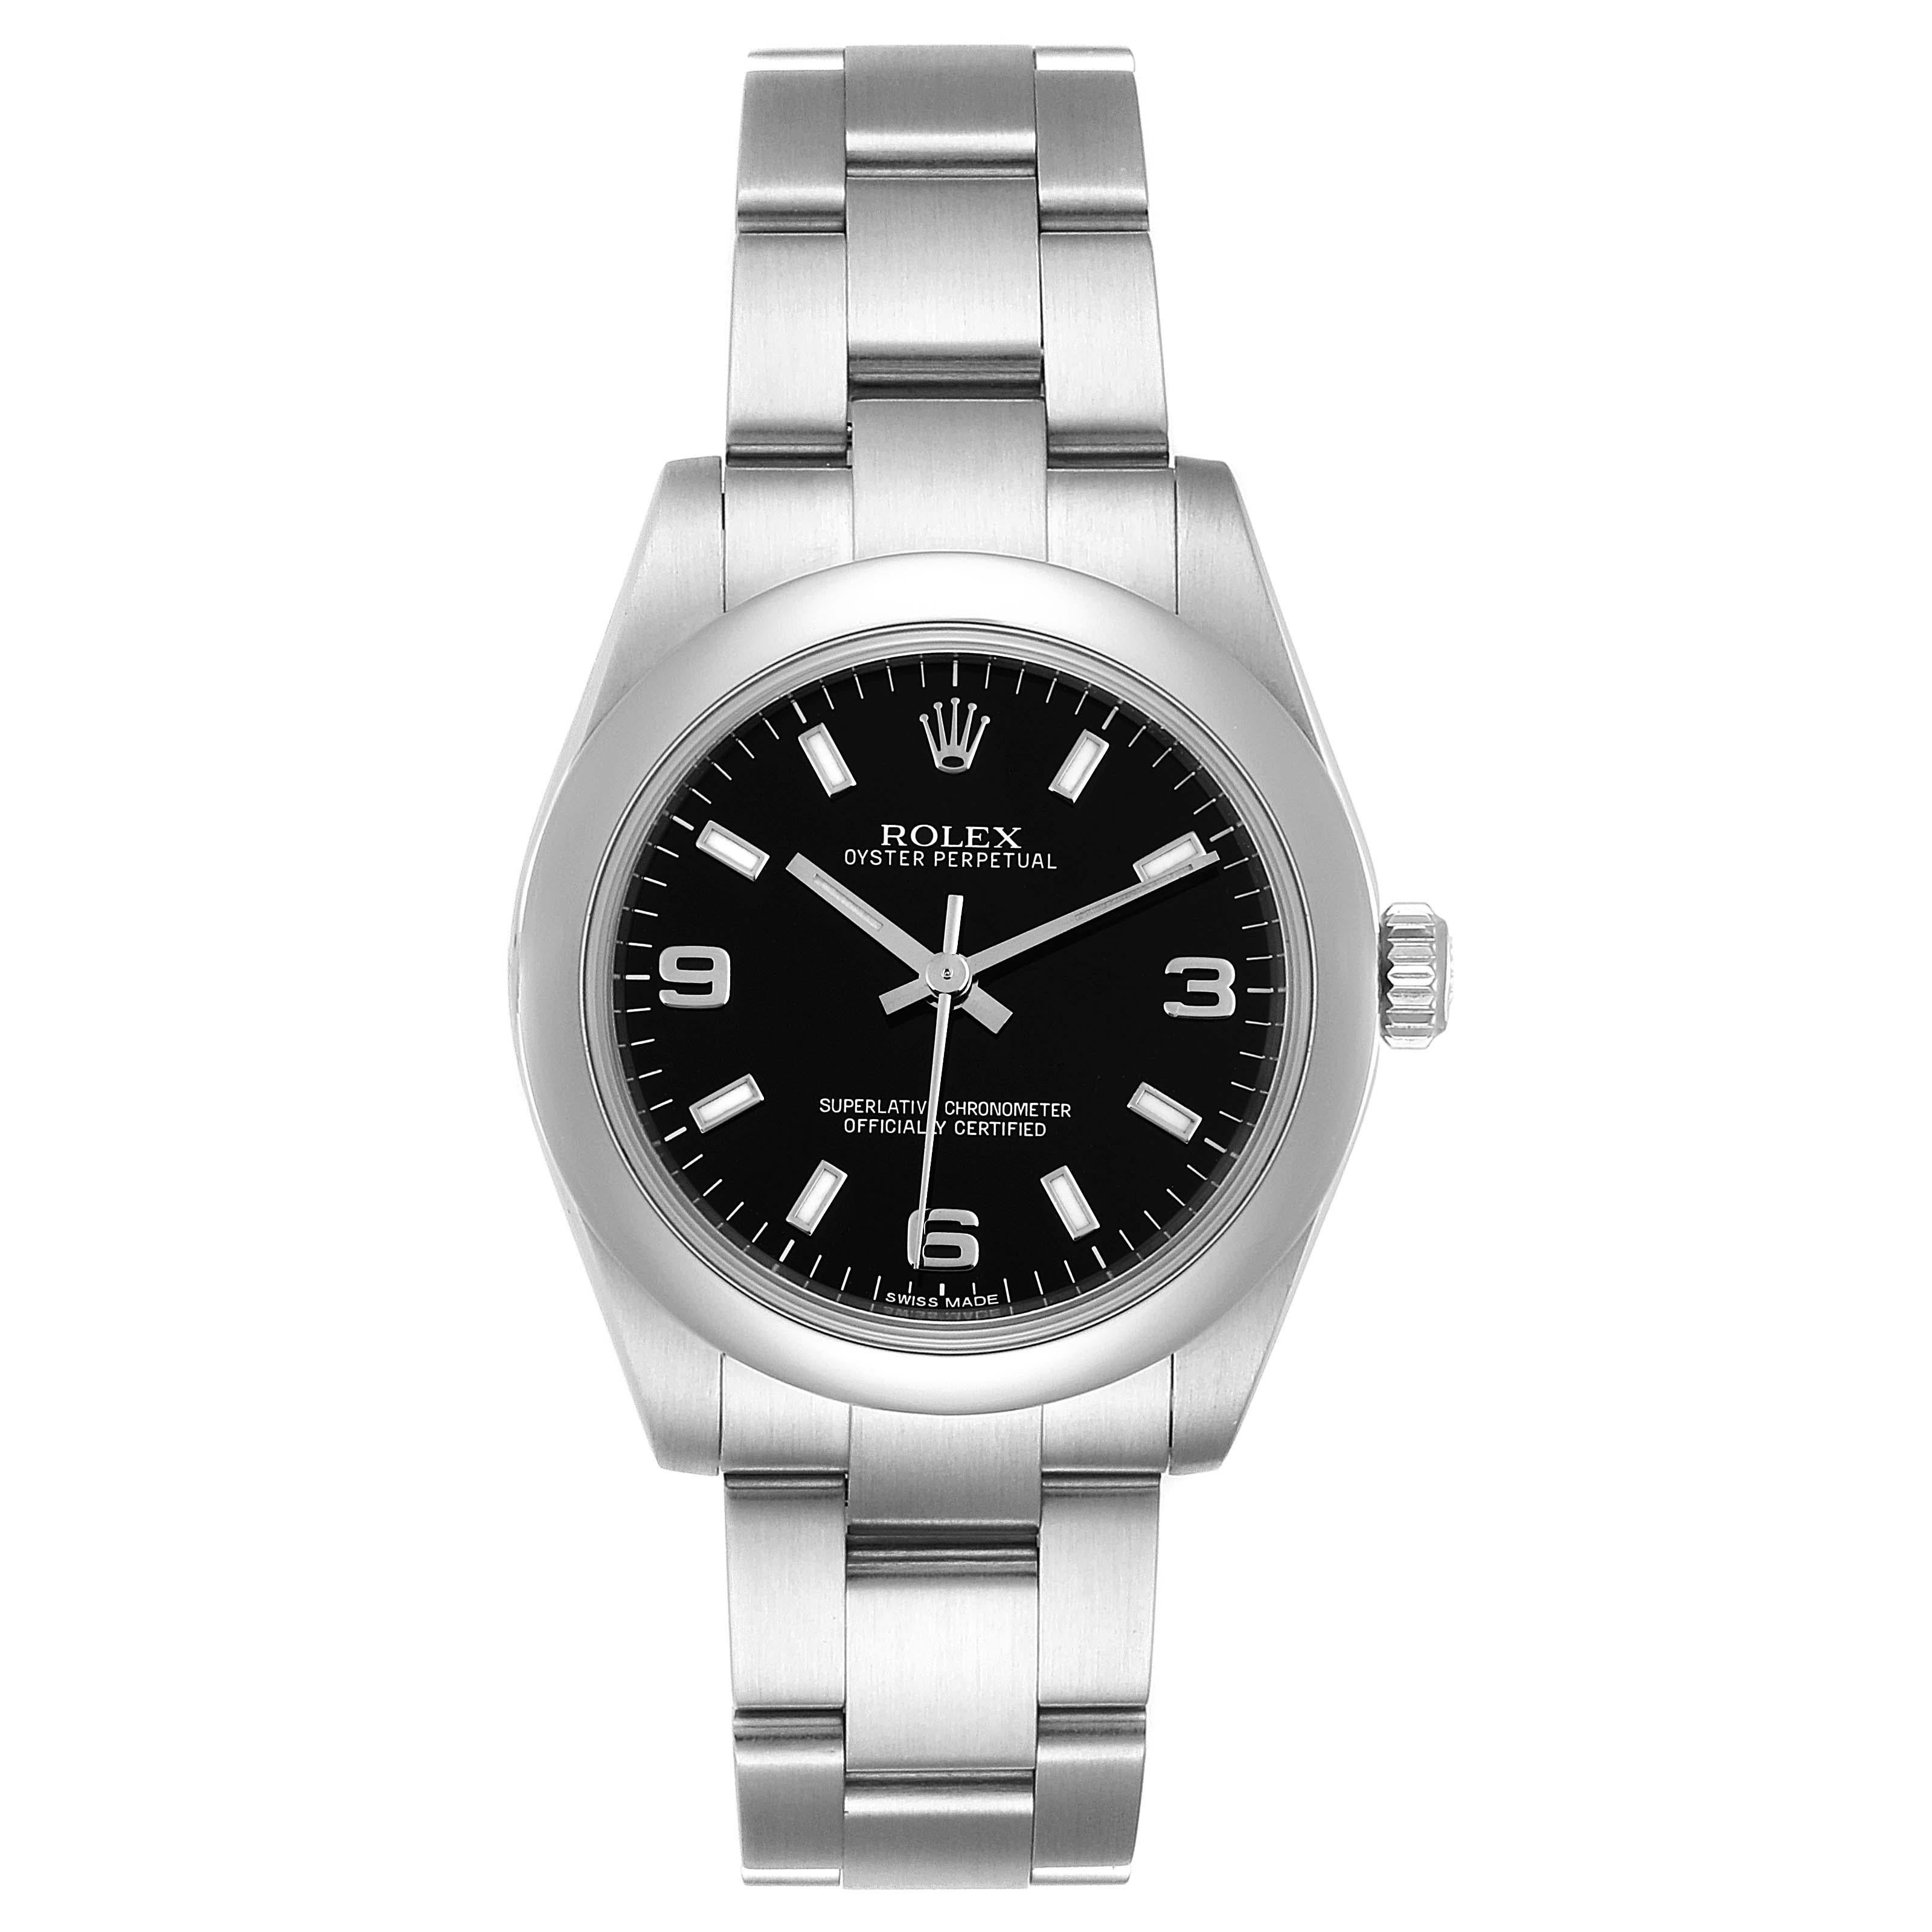 Rolex Midsize Black Dial Domed Bezel Steel Ladies Watch 177200. Officially certified chronometer self-winding movement with quickset date function. Stainless steel oyster case 31.0 mm in diameter. Rolex logo on a crown. Stainless steel smooth domed